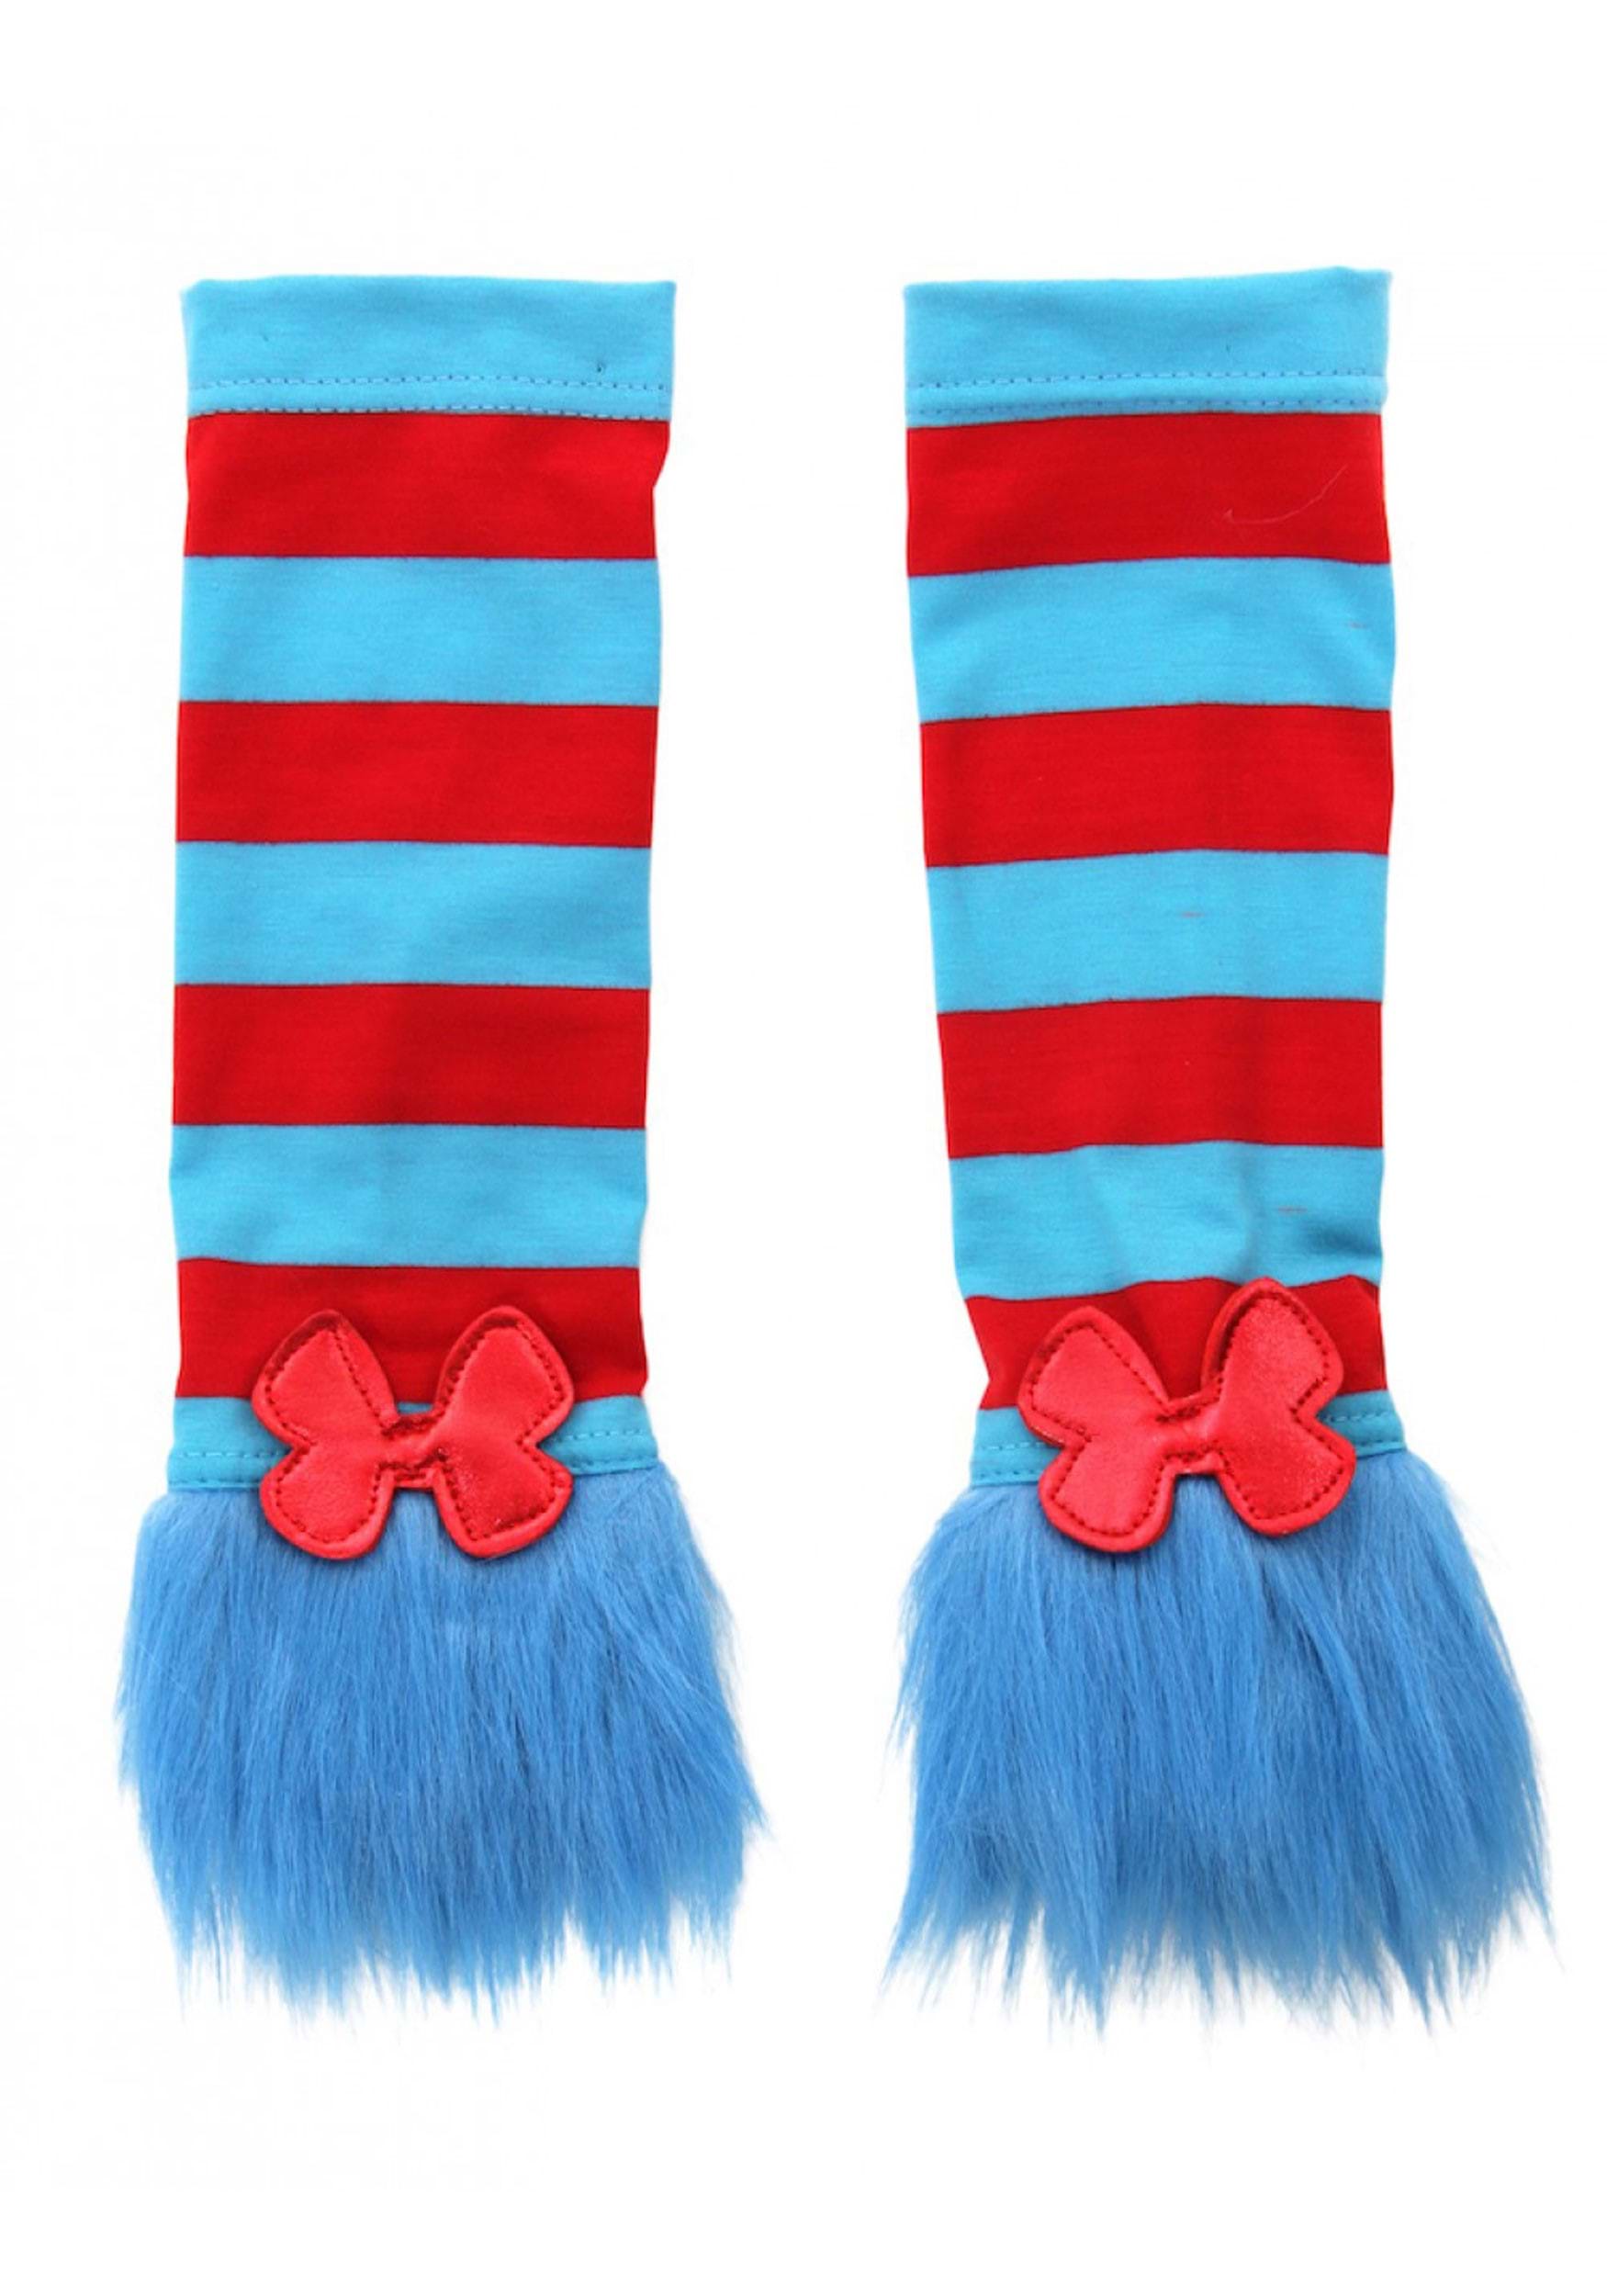 Thing 1 & Thing 2 Glovettes from Dr. Seuss